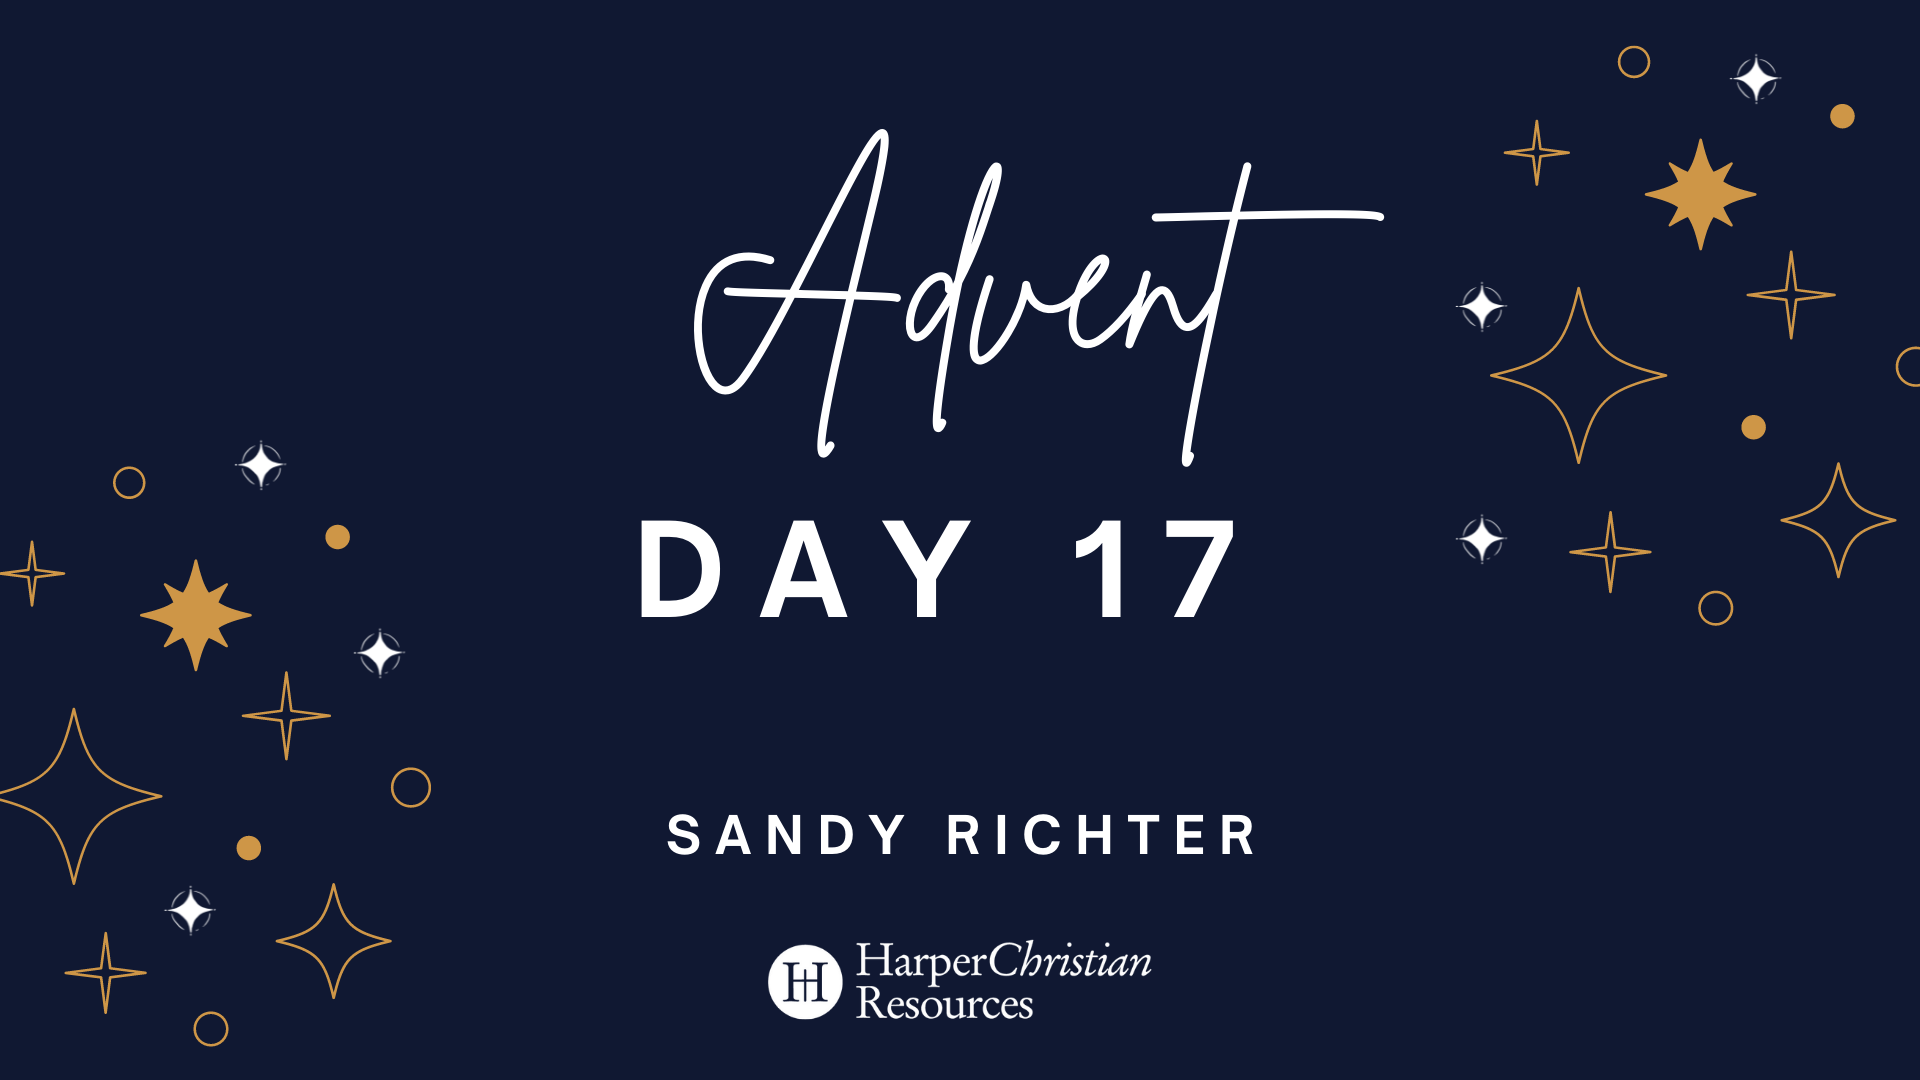 Advent Day 17: A message from Dr. Sandy Richter